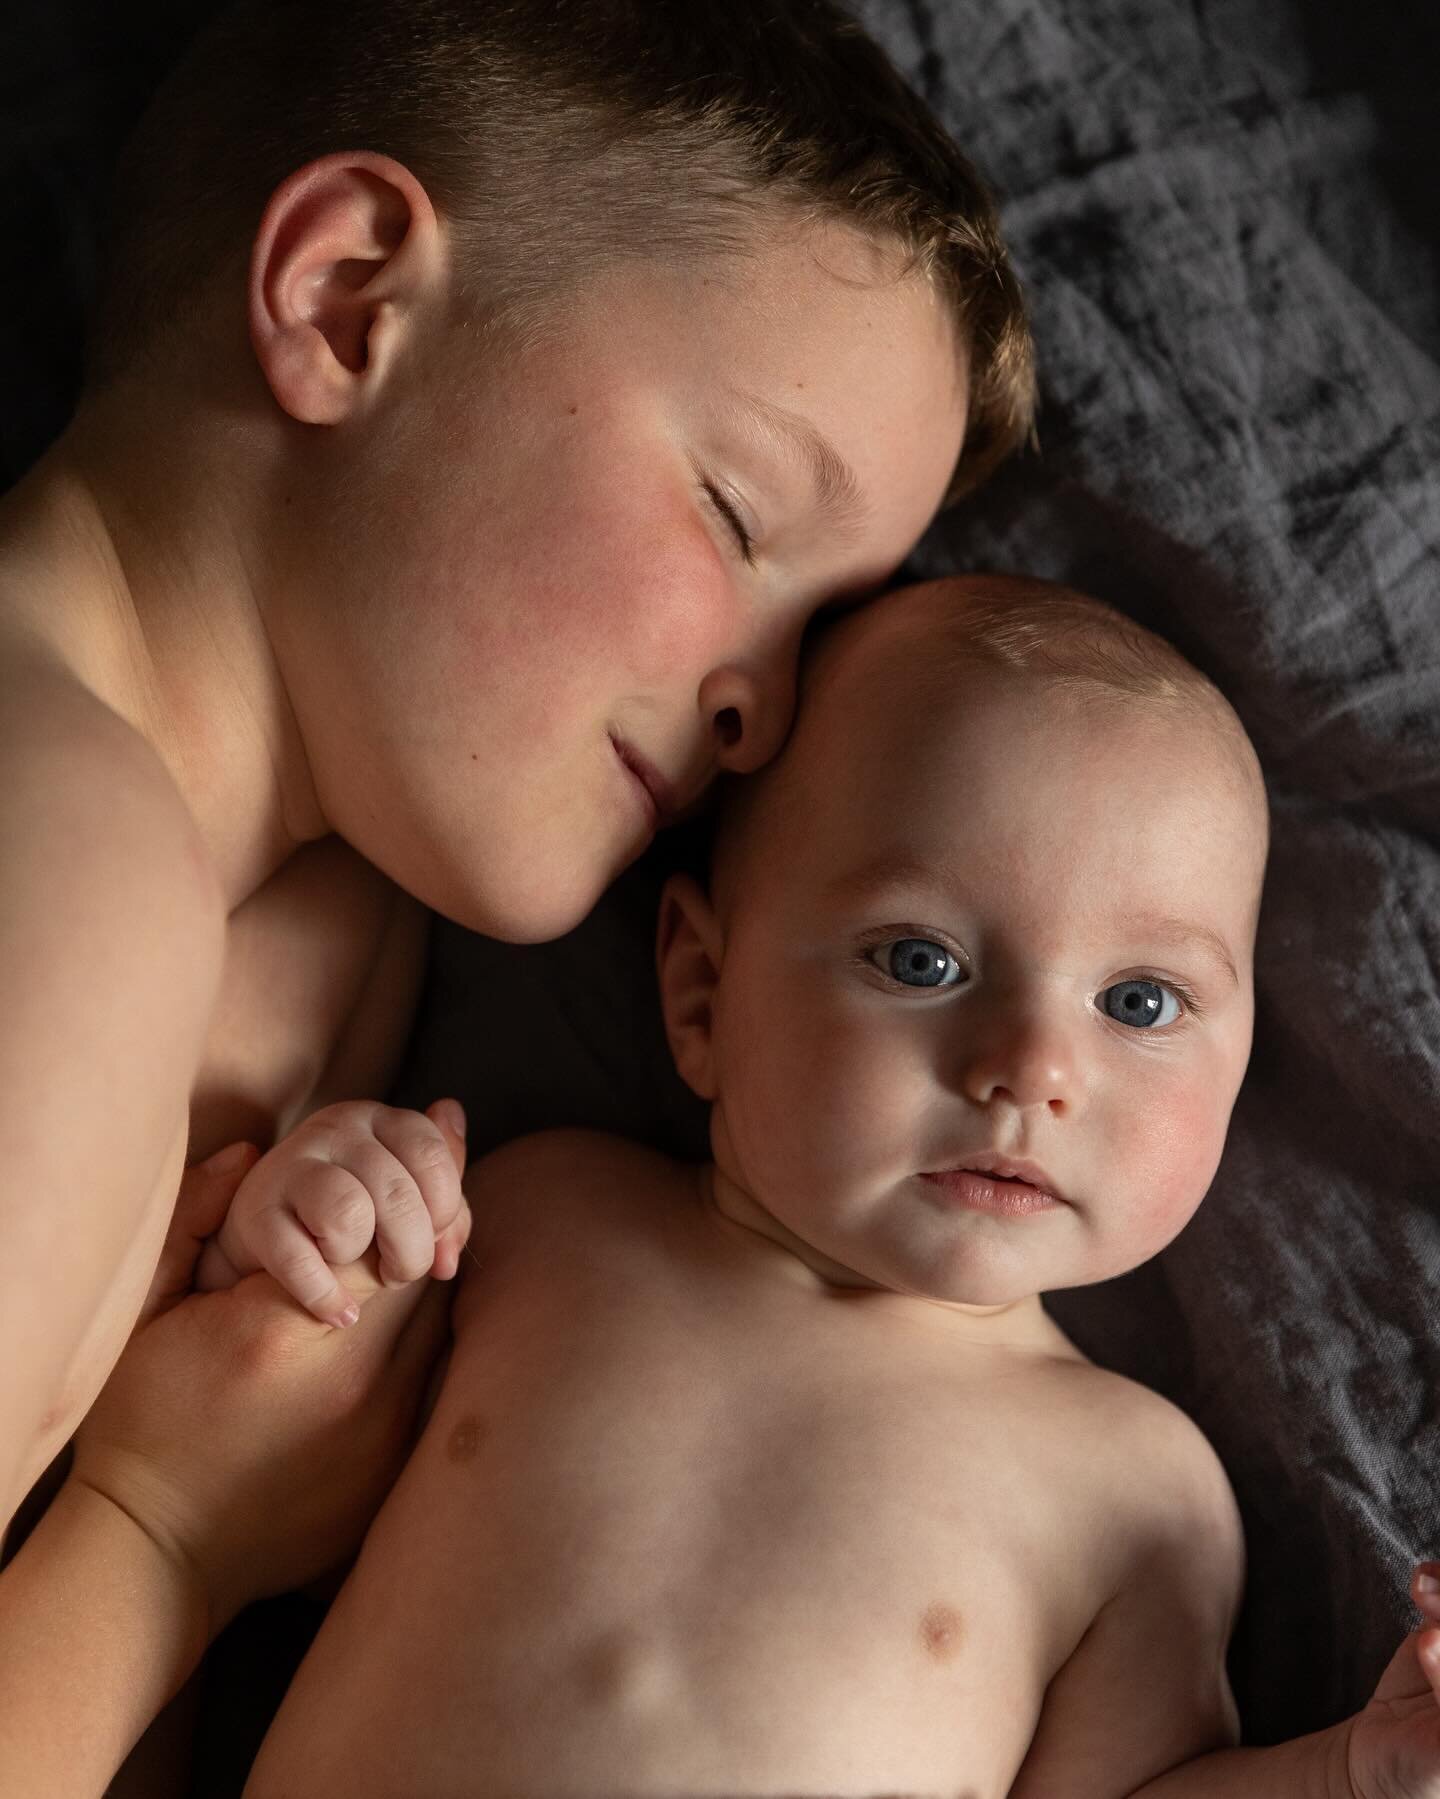 I&rsquo;ll be honest - this time around I haven&rsquo;t had my camera out a lot since Forrest has been born, but as I was packing my bag for my first shoot post maternity leave these two were being their sweet selves and I had to snap these photos.
D